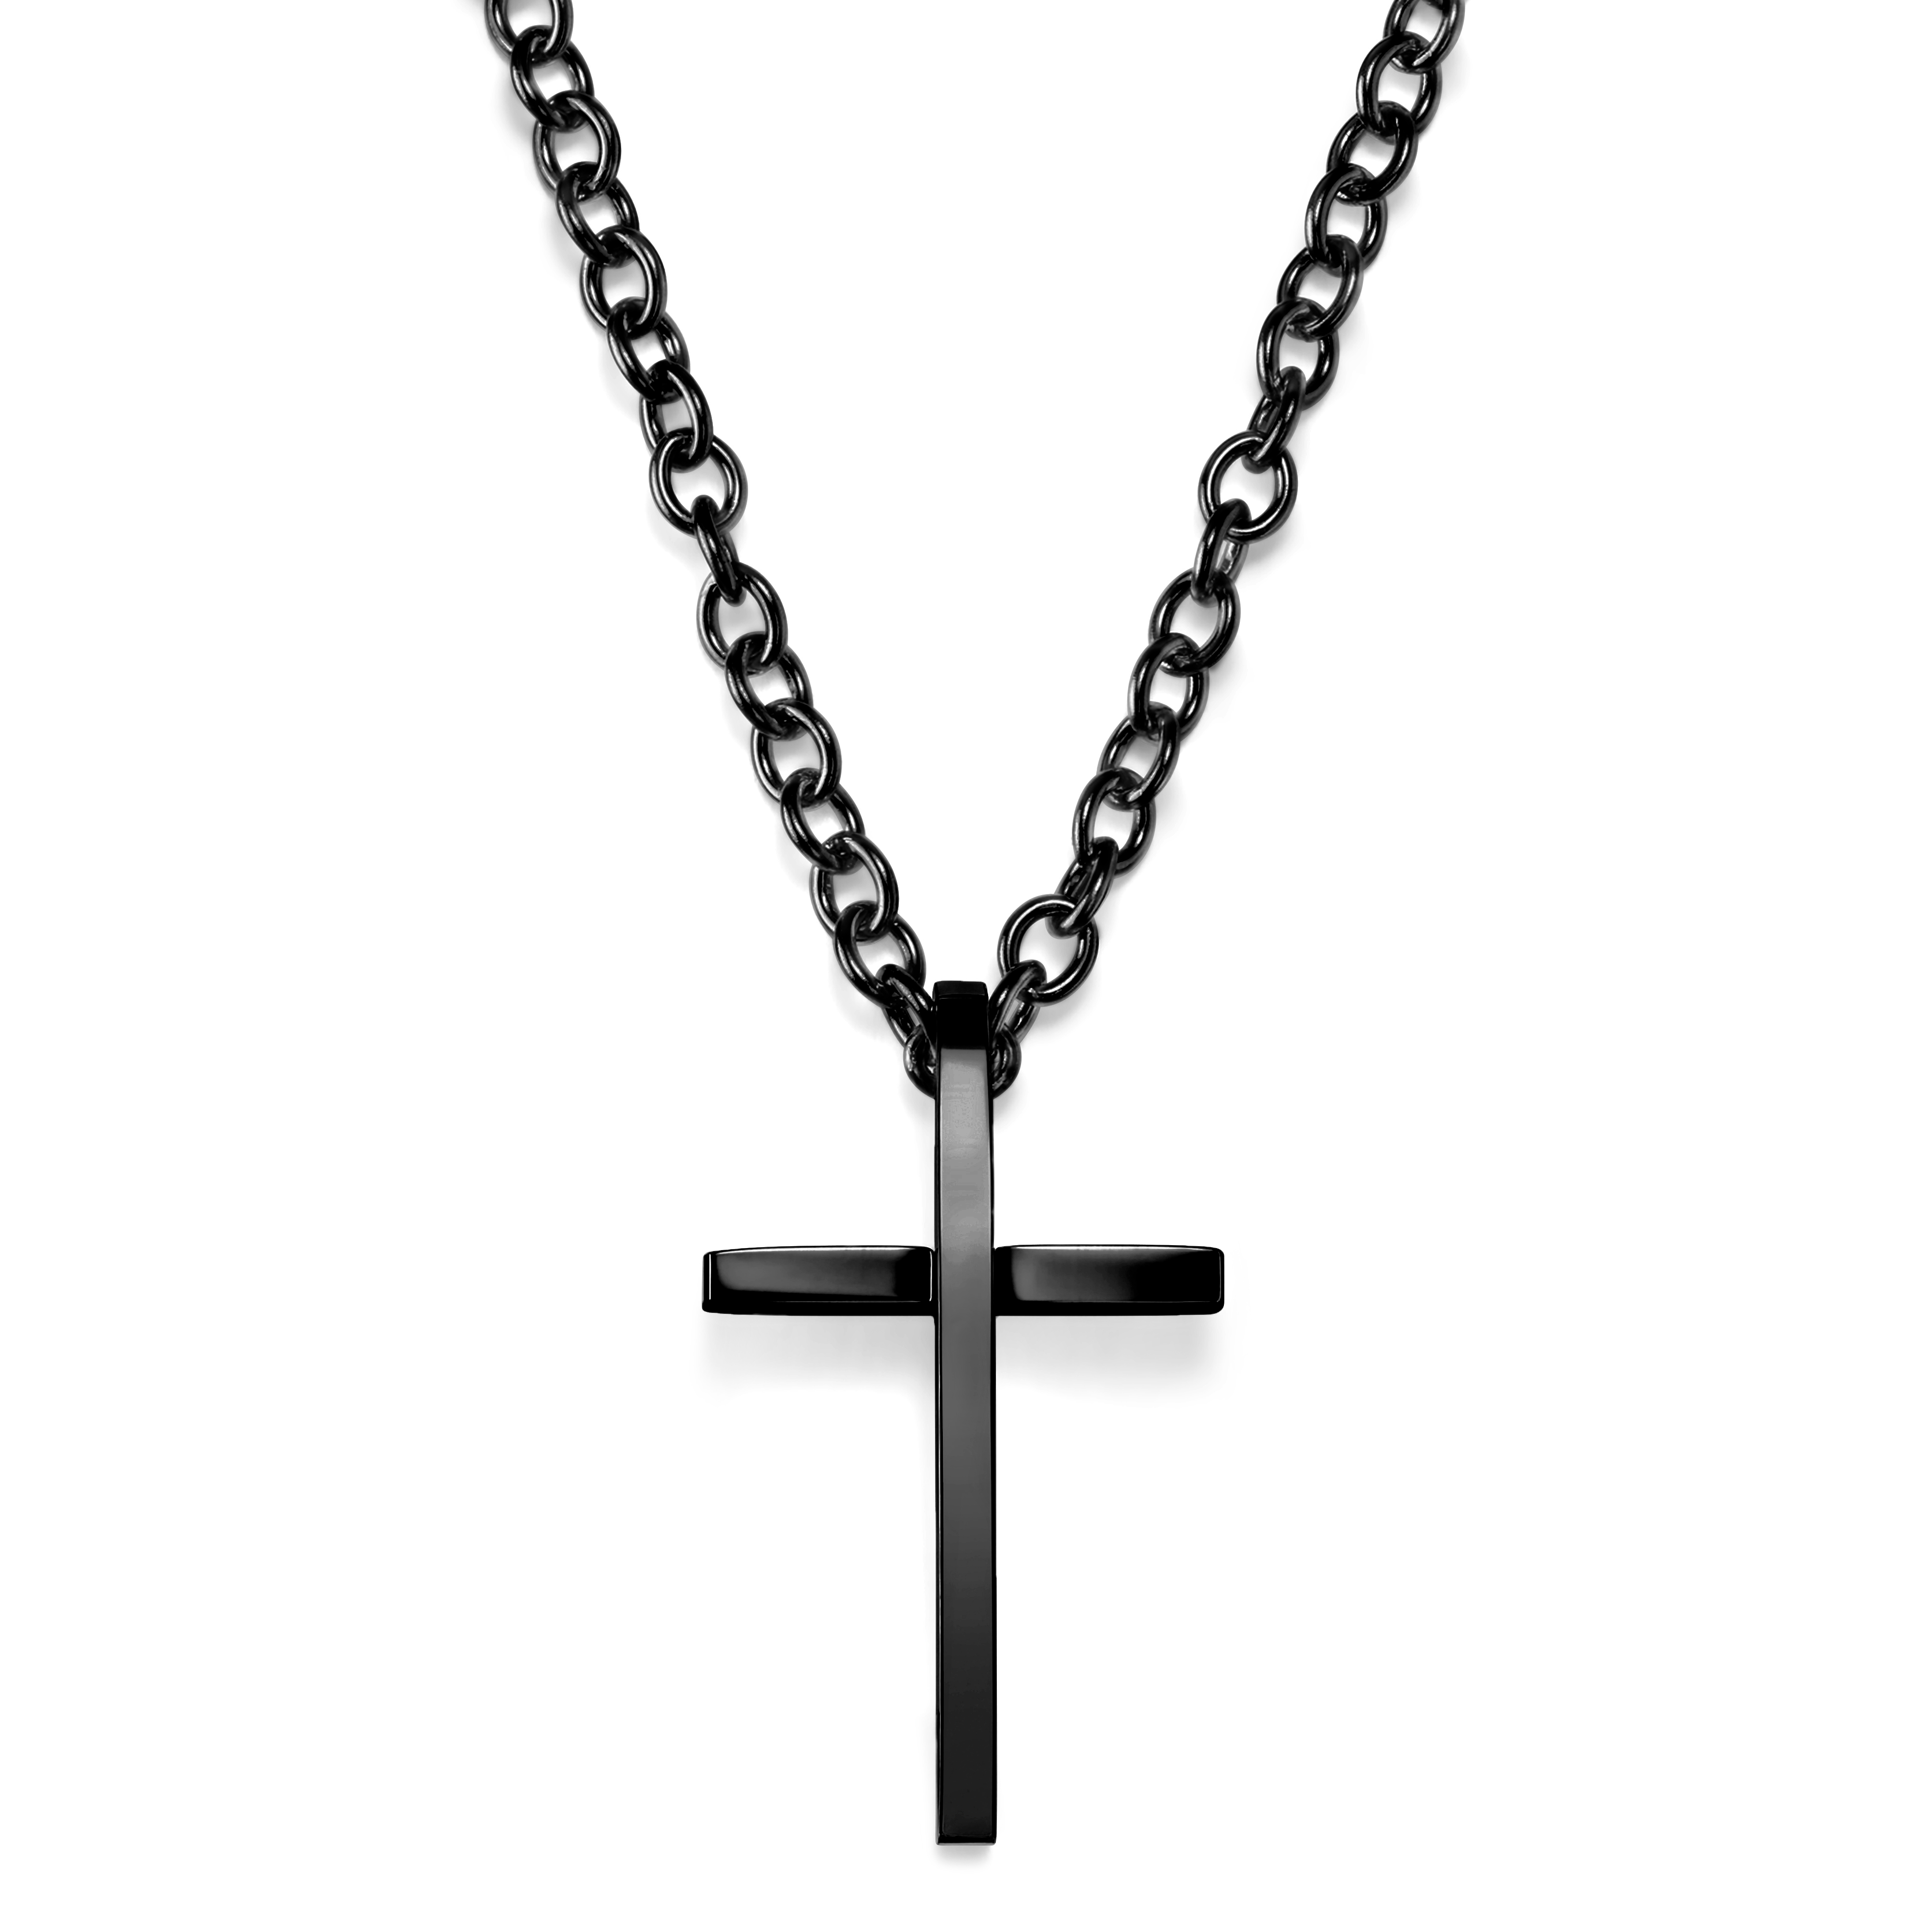 Stainless Steal Rhinestone Cross Necklace – Brandy Melville UK